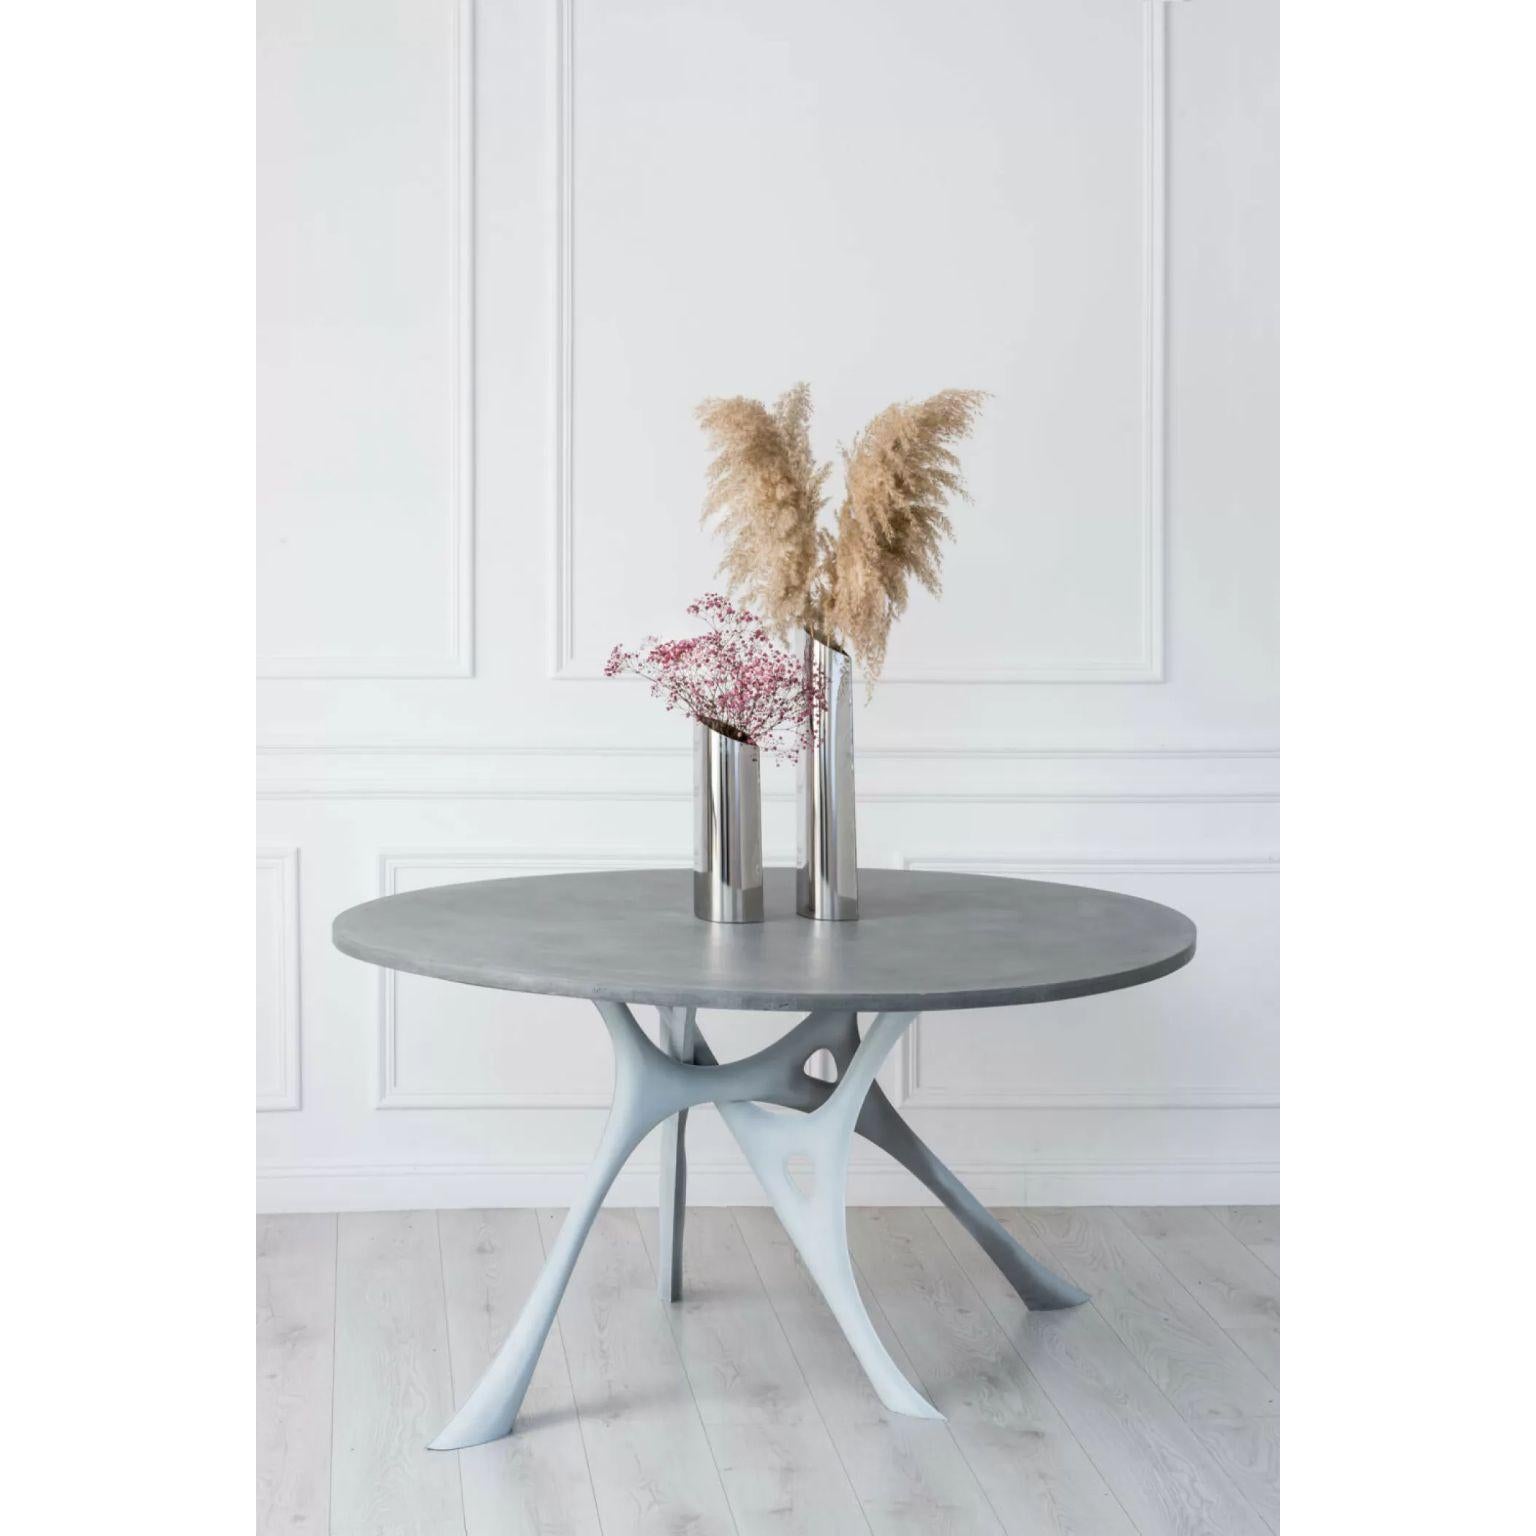 Morph, Thermometallized Steel and Concrete Table by Zieta
Dimensions: D 120 x W 150 x H 74 cm.
Materials: Thermometallized Stainless Steel legs and Concrete top.

Interweaving interpretations of nature
The MORPH table takes inspiration from the